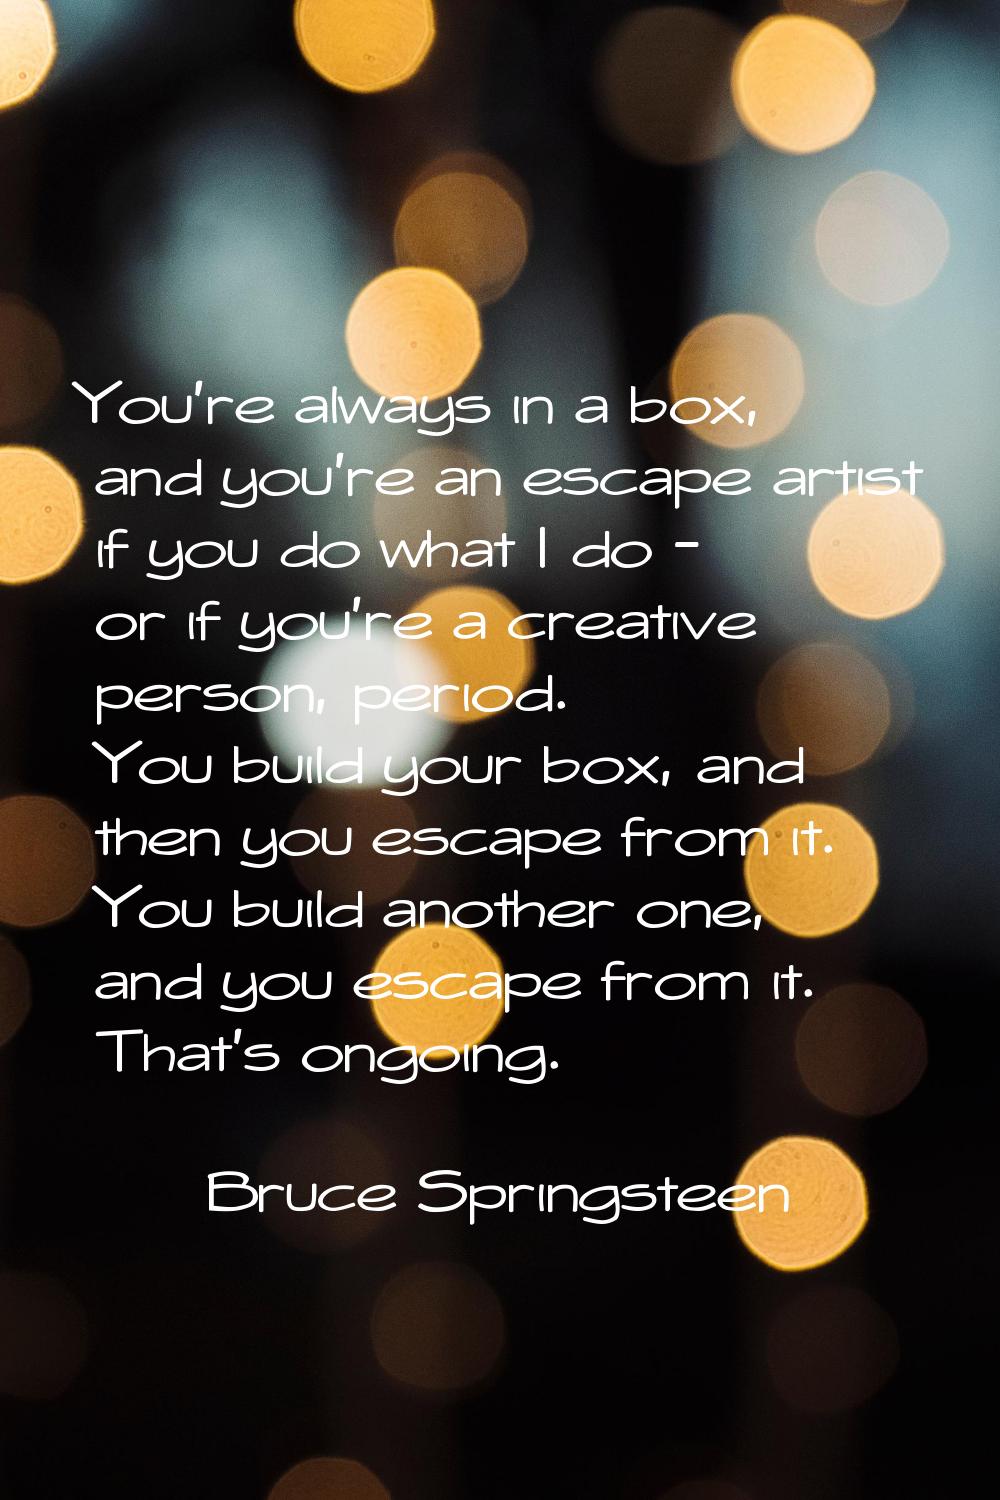 You're always in a box, and you're an escape artist if you do what I do - or if you're a creative p